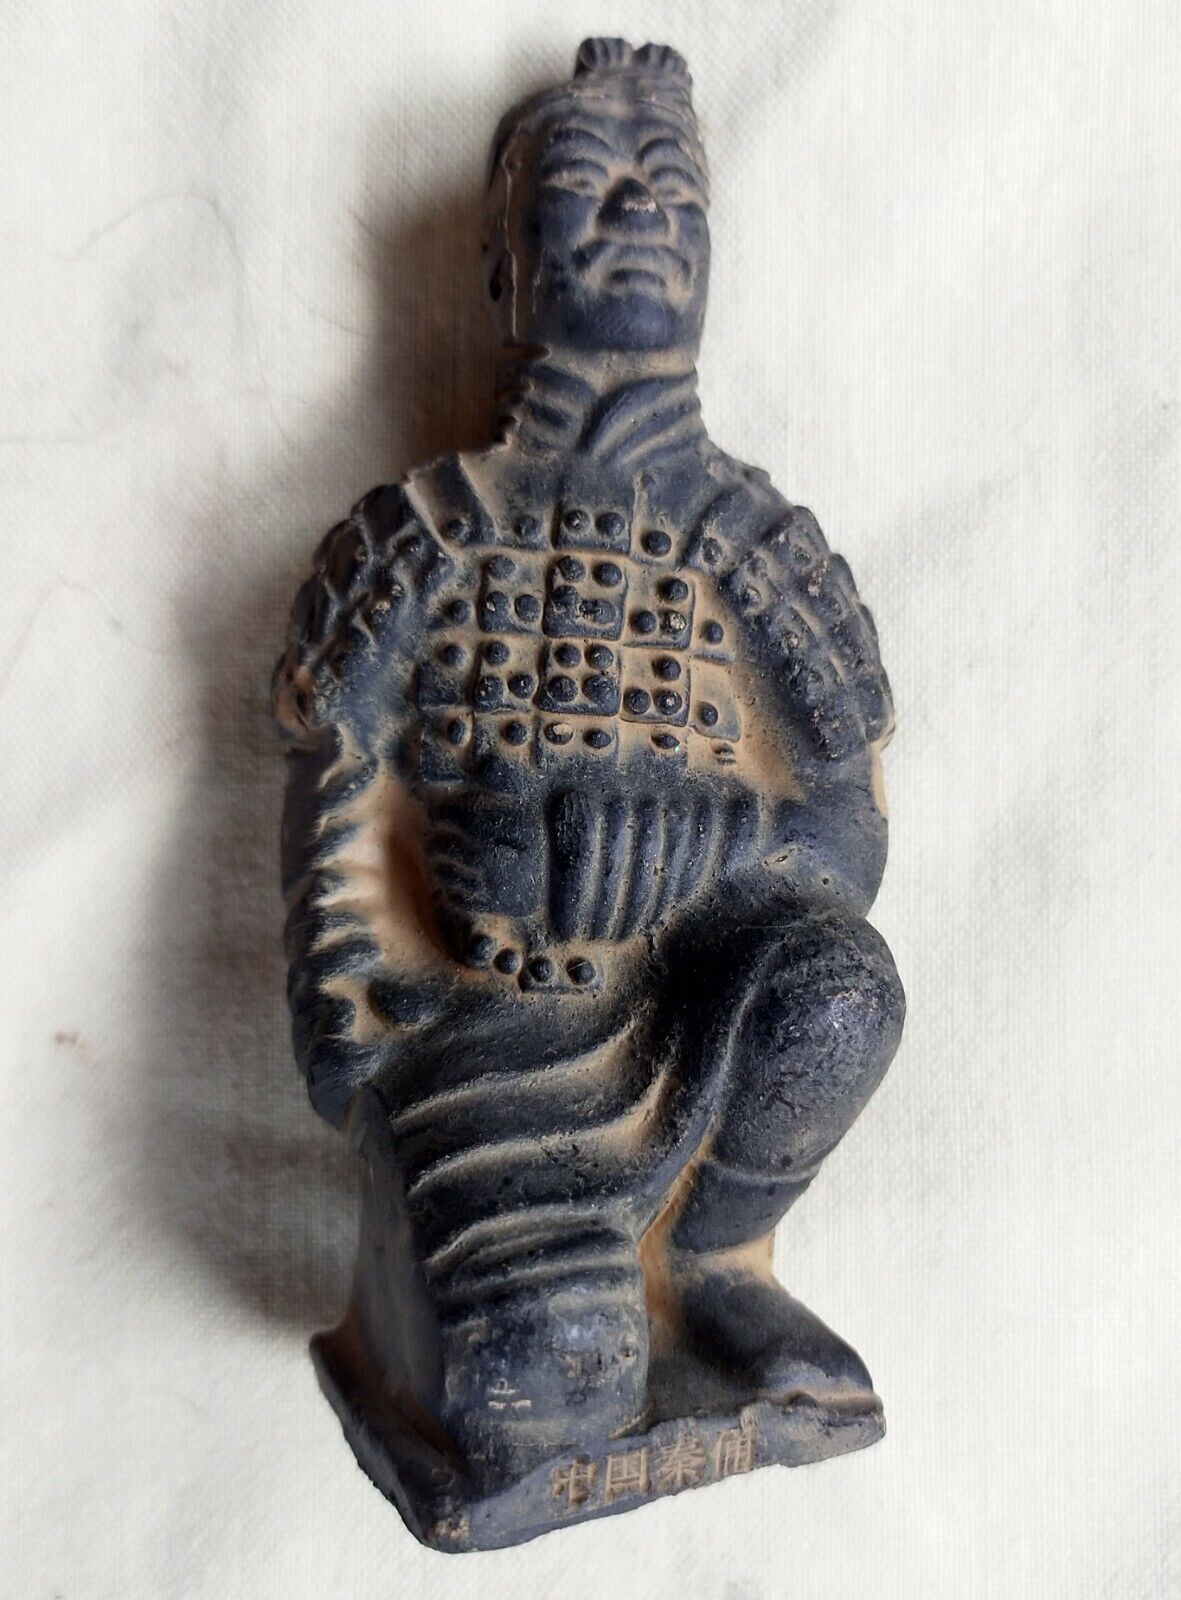 Antique Valuations: Chinese Terracotta Army kneeling Soldier